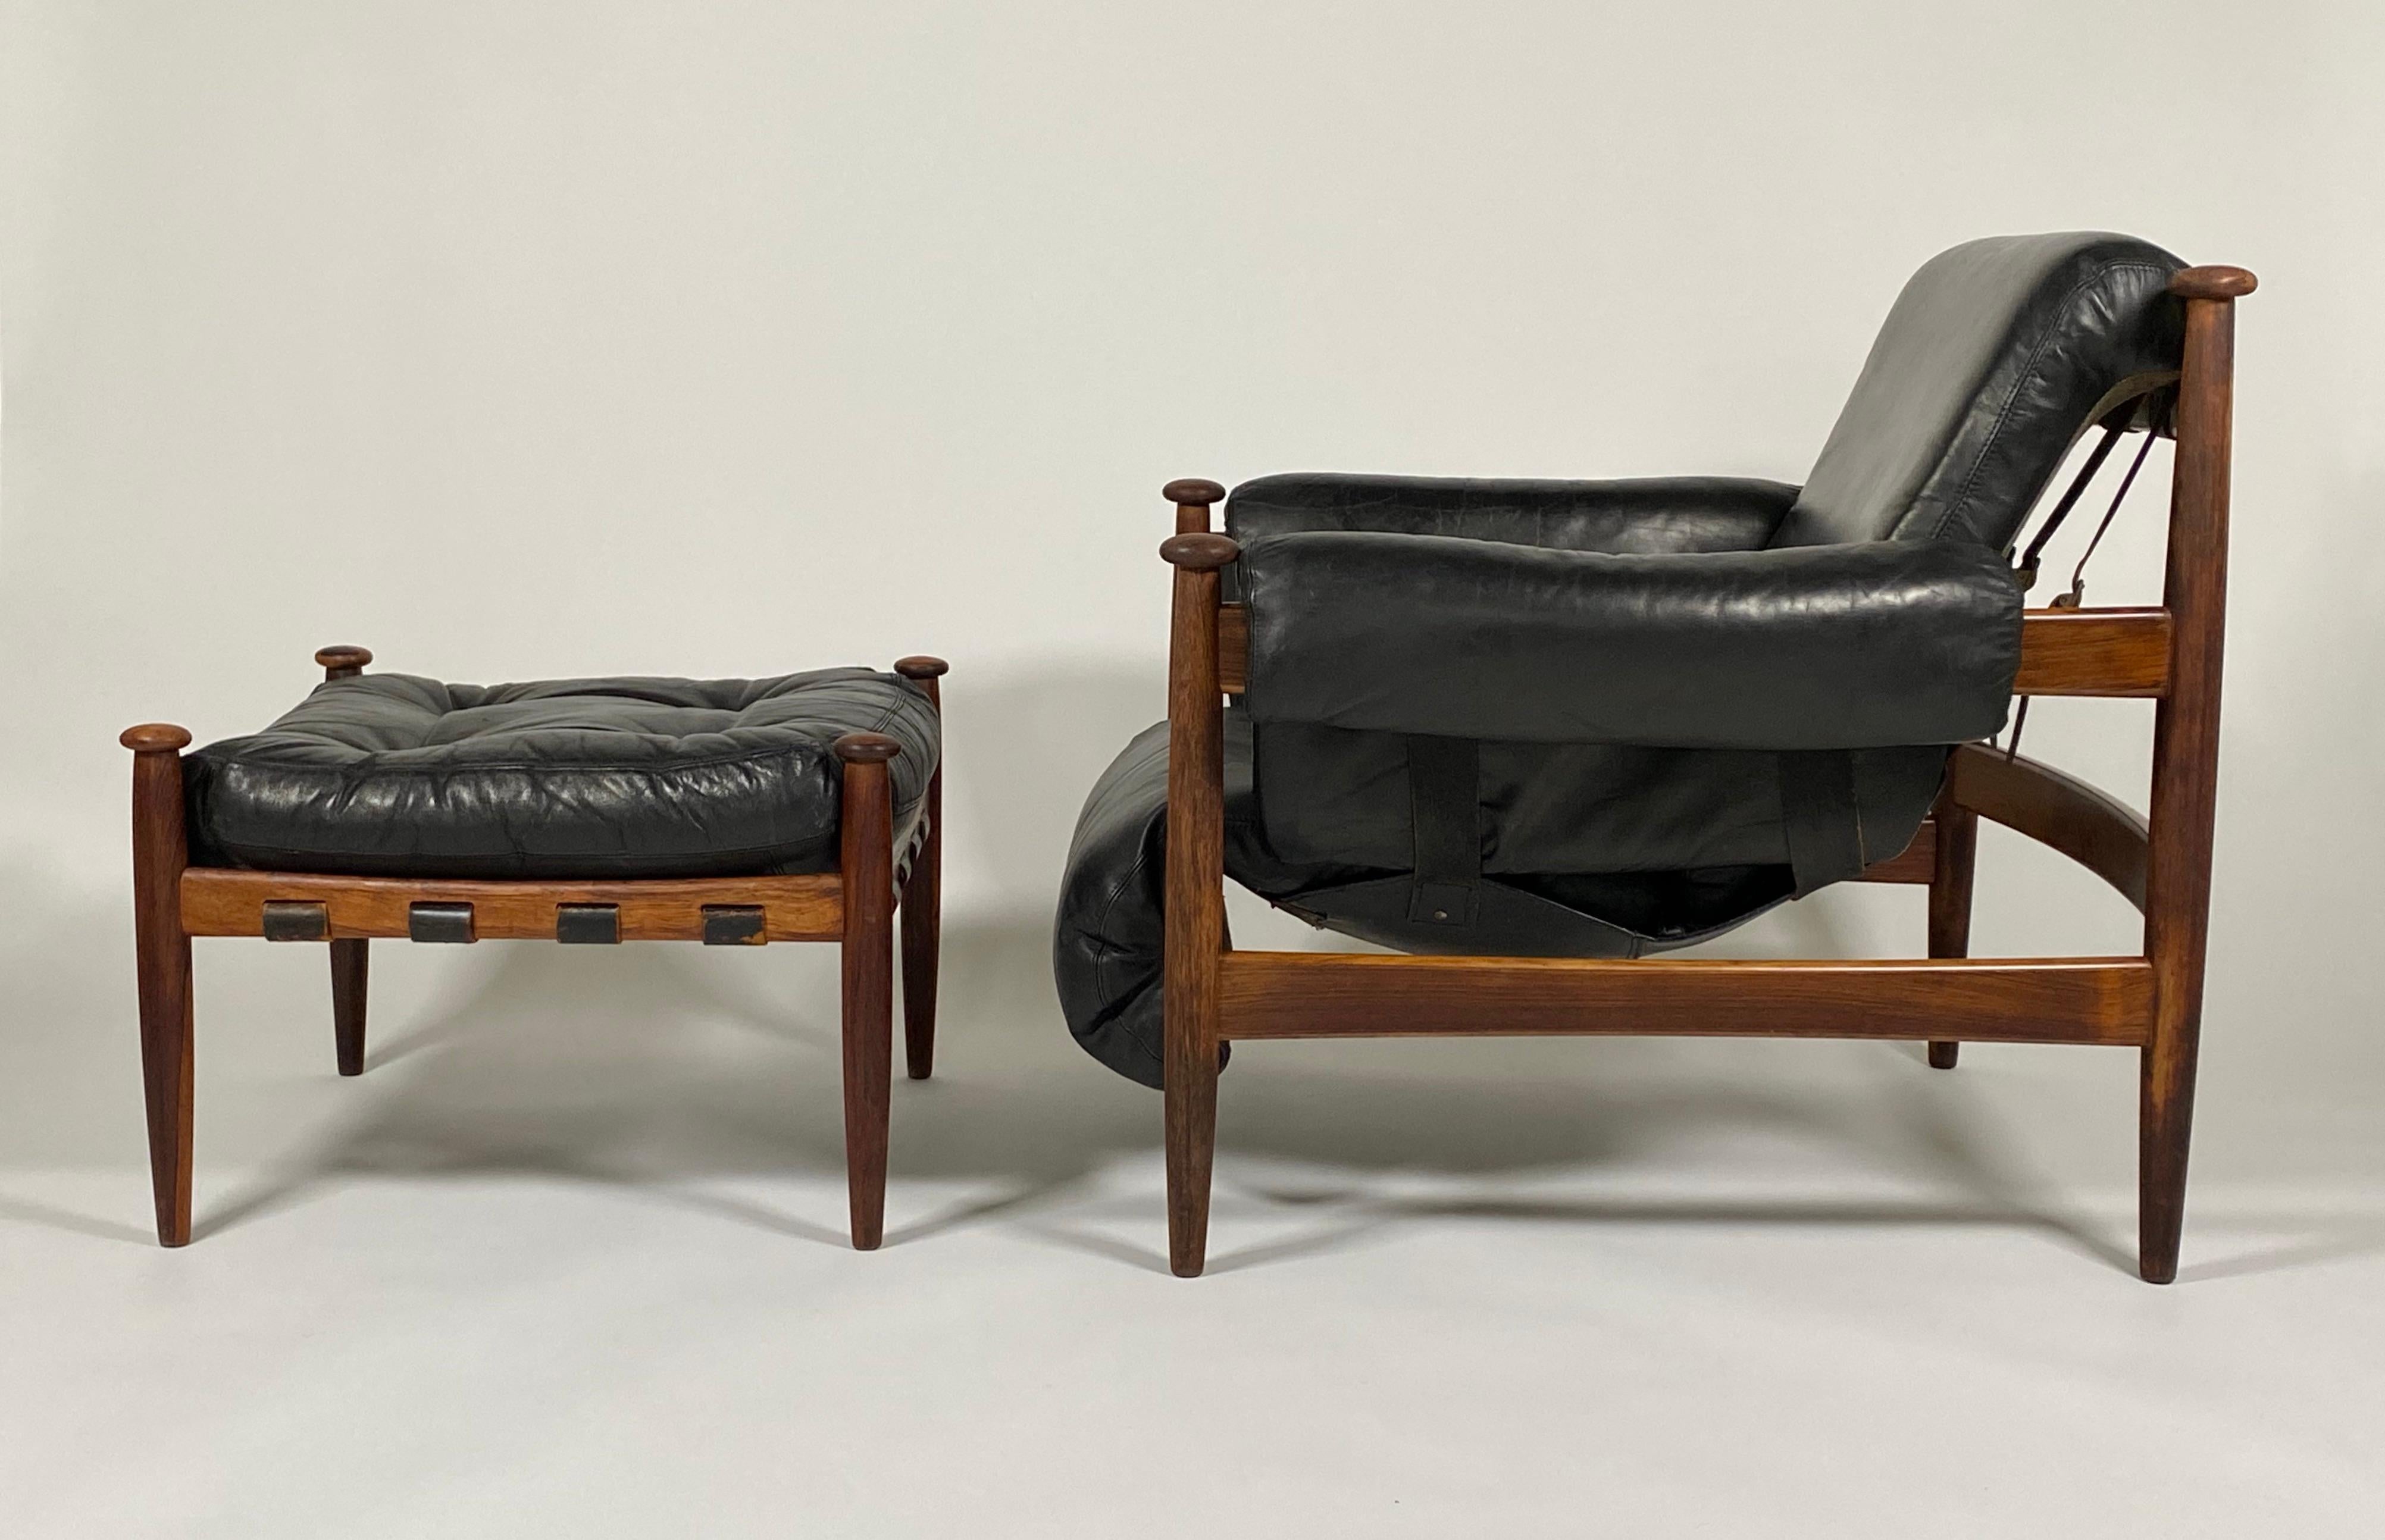 Circa 1960s Amiral Lounge and Ottoman by Swedish designer Eric Merthen for IRE Industri Ire AB Skillingaryd, Sweden. Constructed of rosewood and fine leather, this design has more Organic Modern approach then many pieces out of this region during